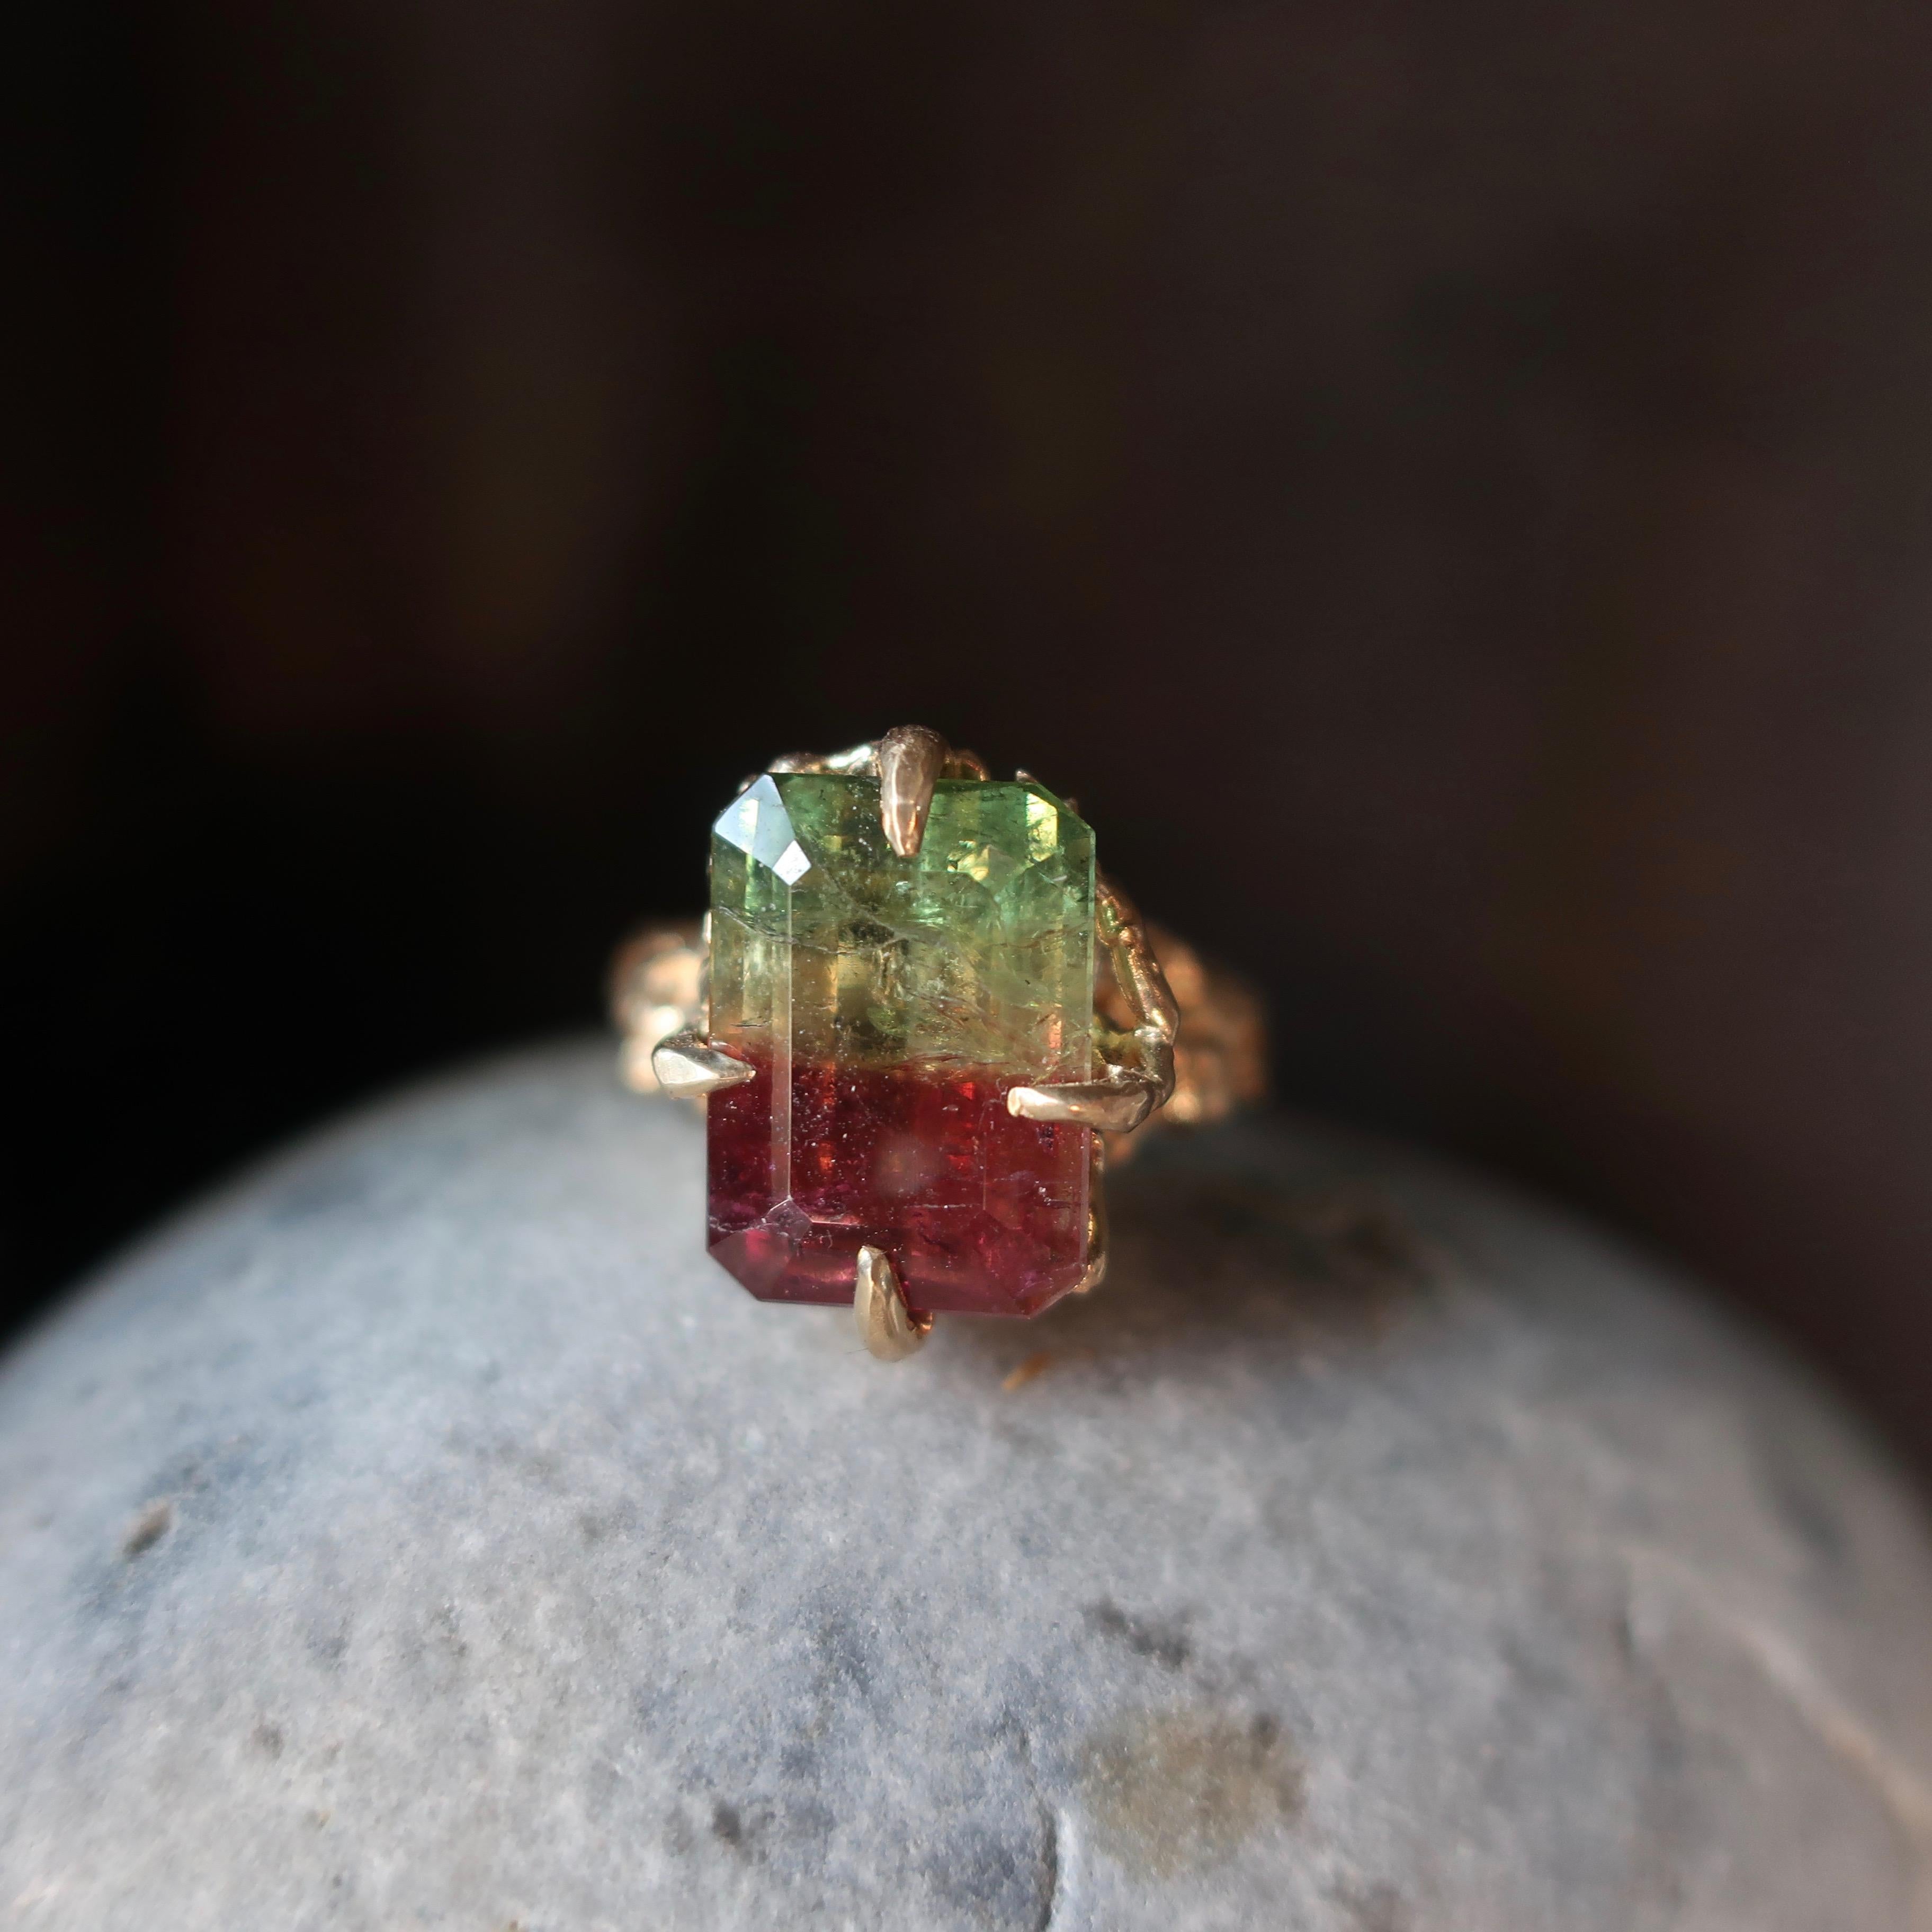 A beautiful emerald cut tourmaline in green yellow and red sits in a beautifully crafted solid 14k yellow gold setting. This three color tourmaline is from the Cruzeiro Mine, Brazil and weights 7.46 carats. Completely one of a kind statement